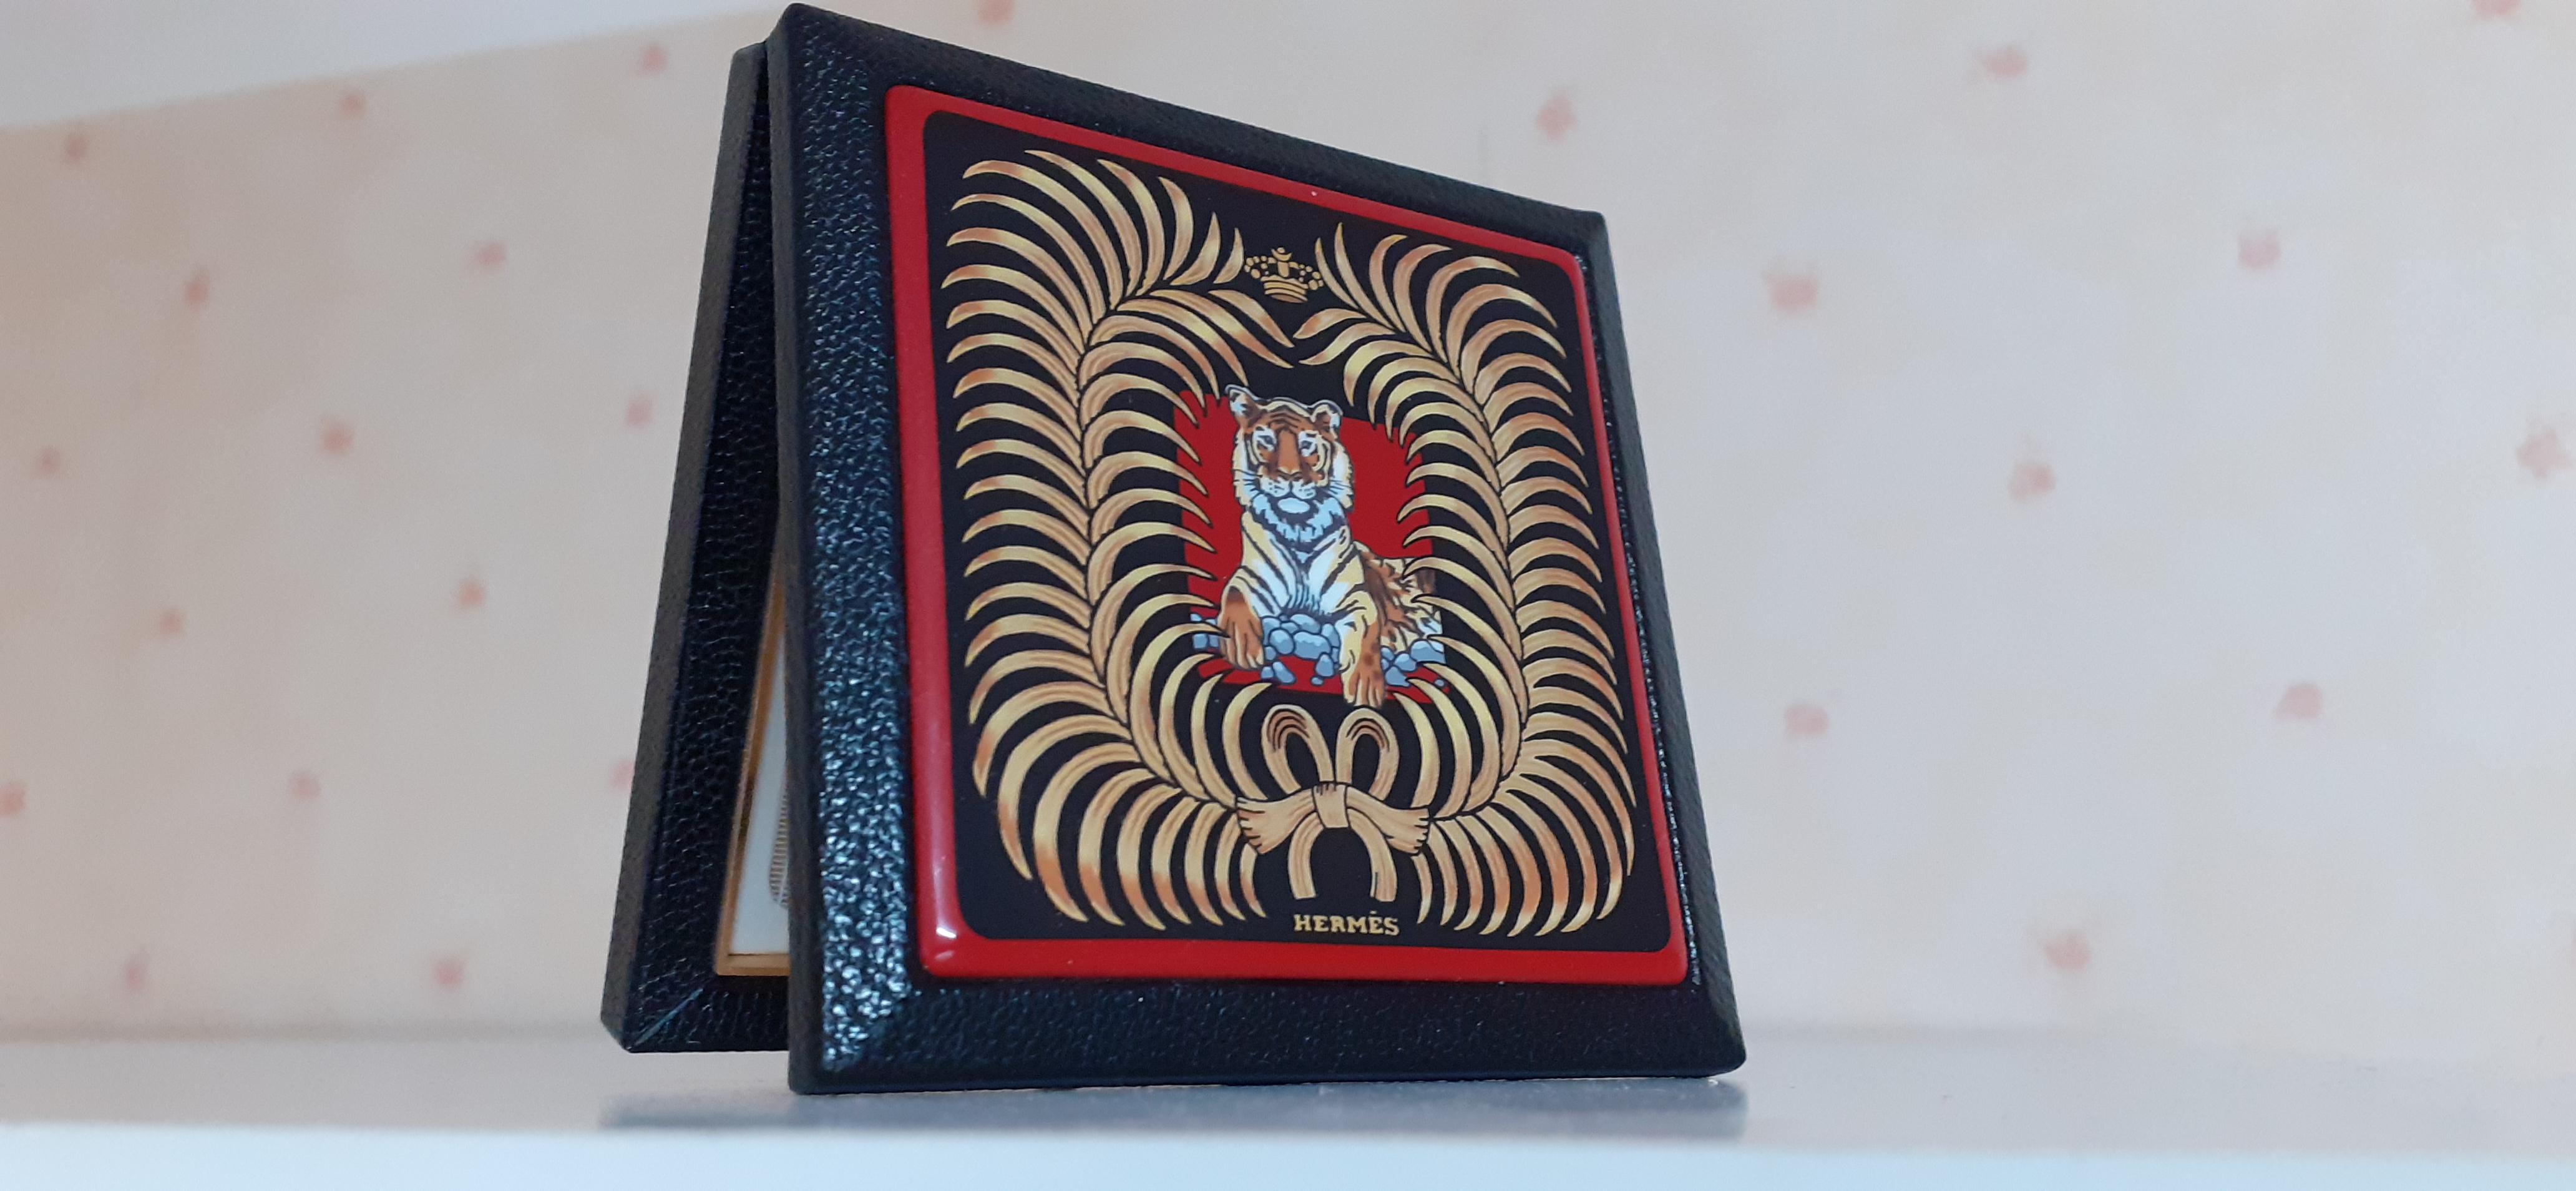 Exceptional Hermès Enamel and Leather Powder Compact Tigre Royal Print RARE For Sale 4